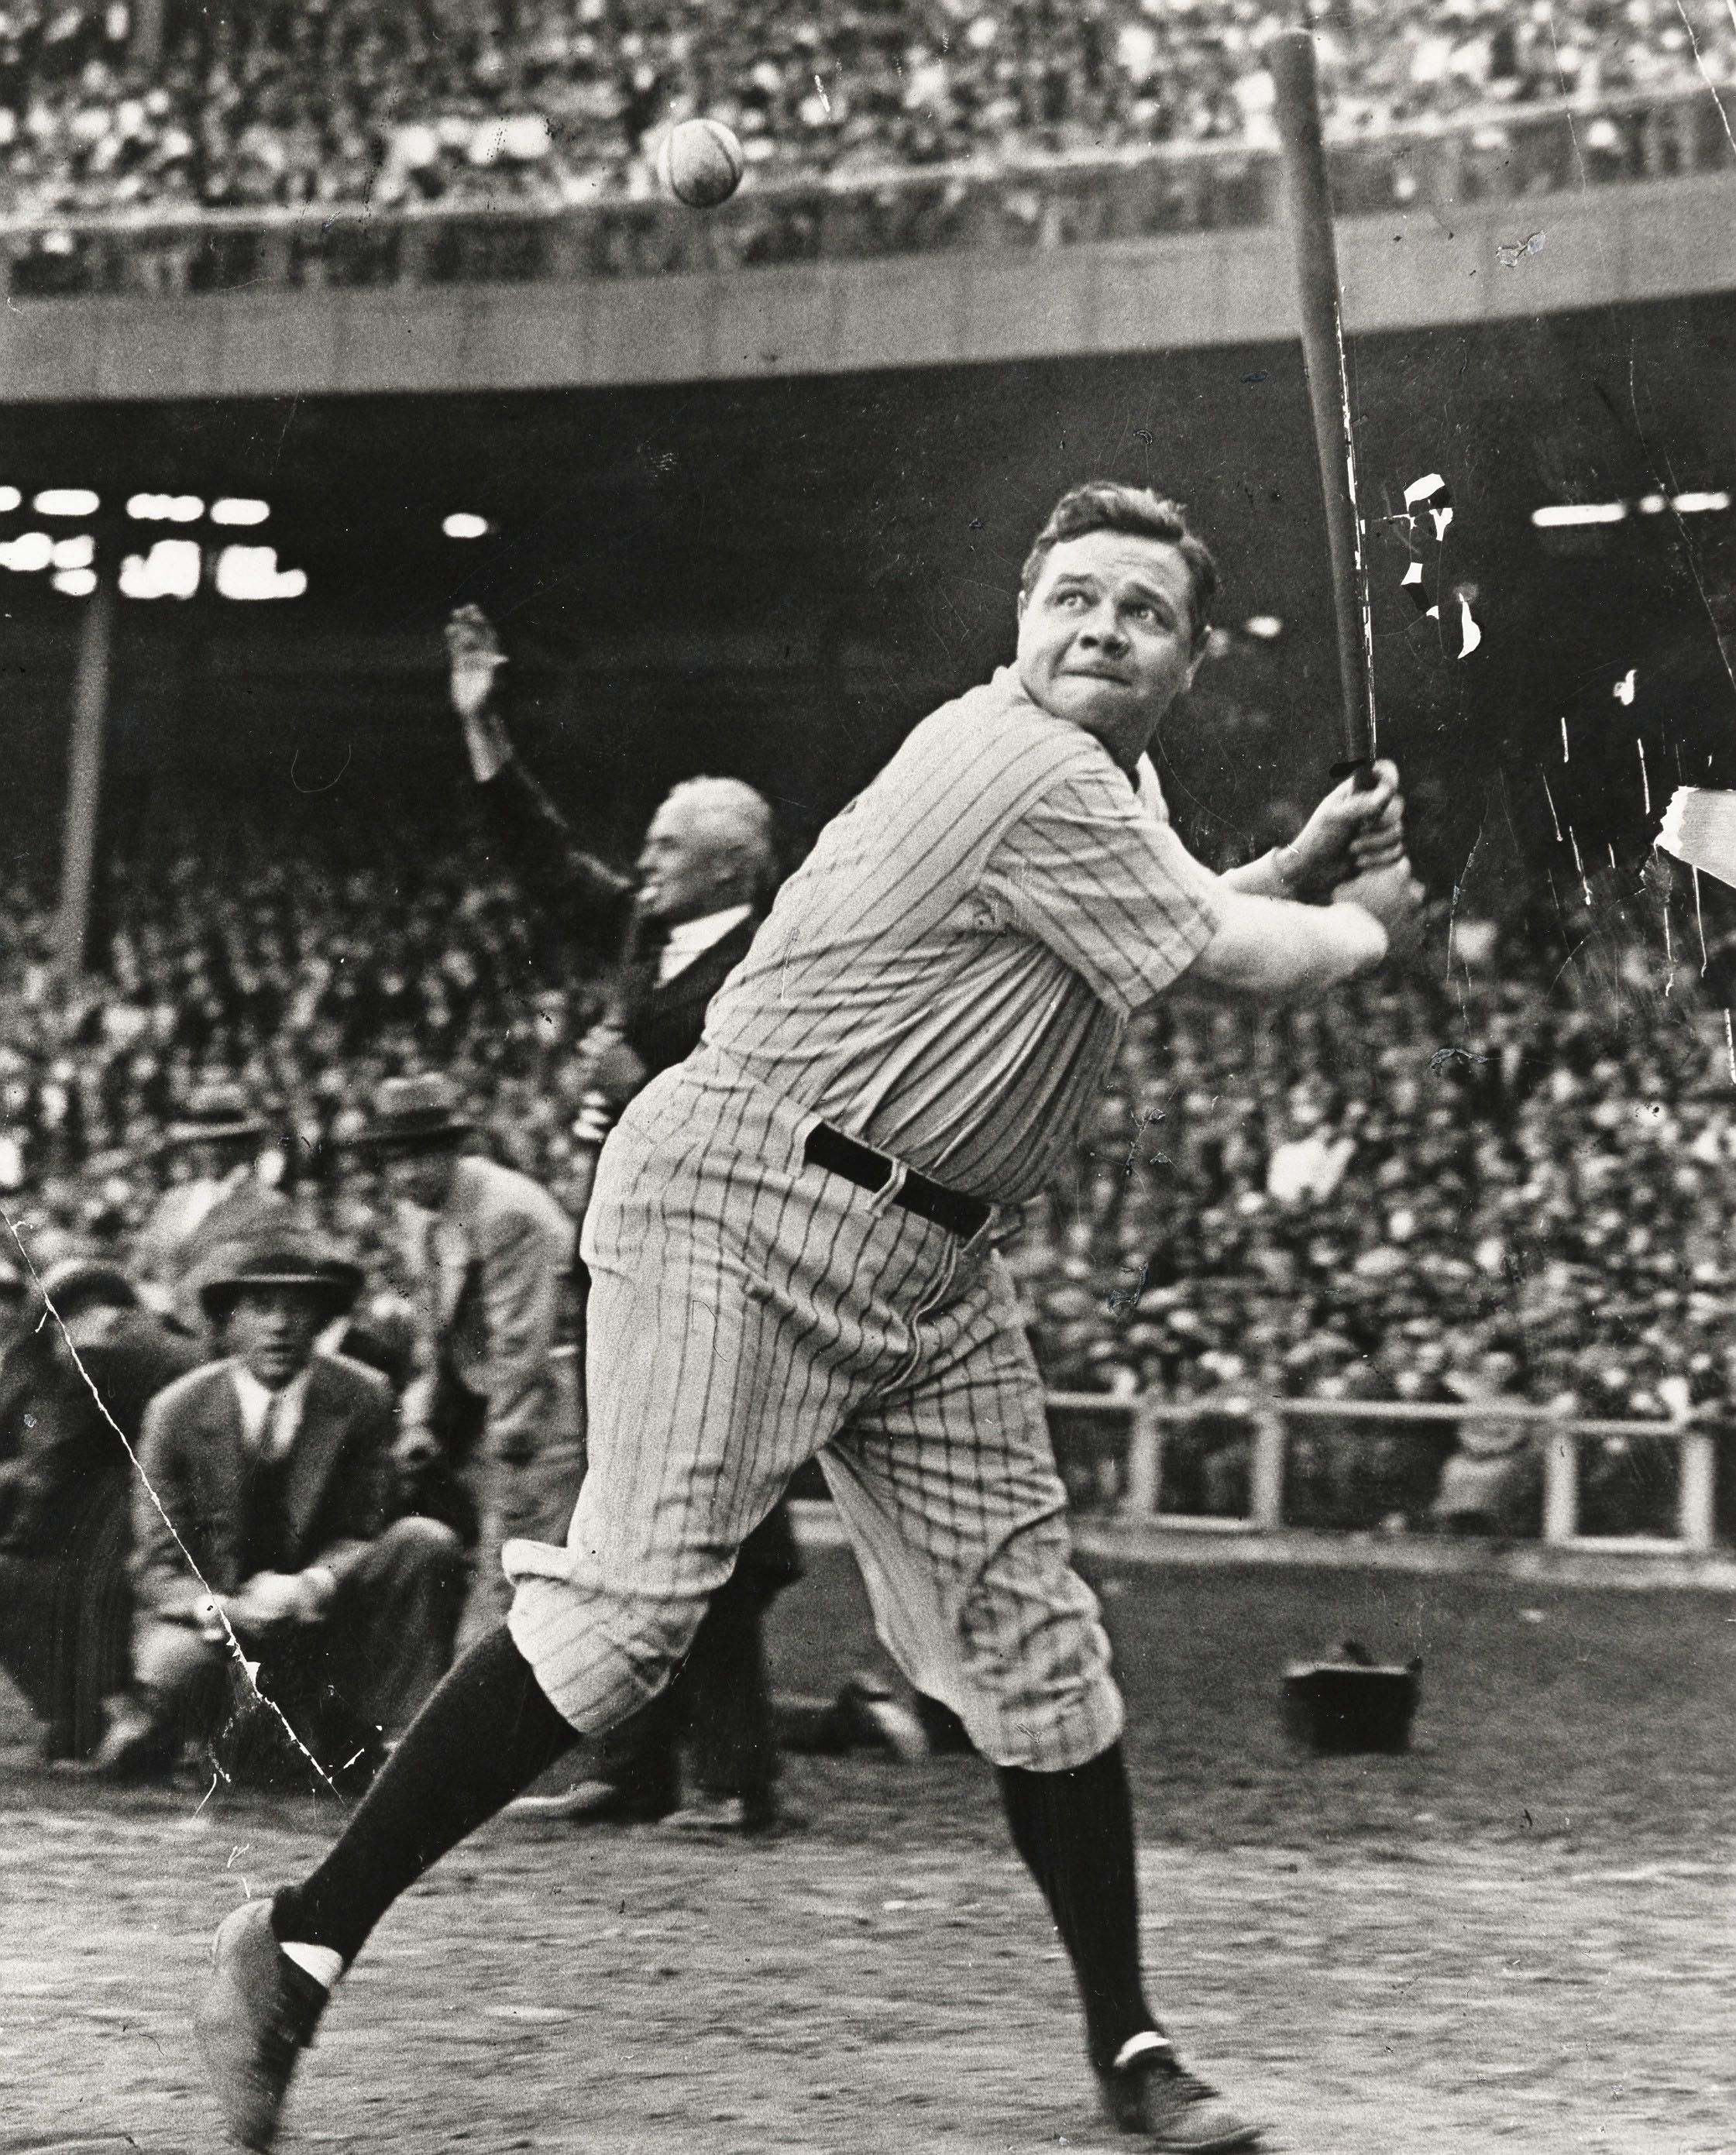 All about Babe Ruth. Publish with Glogster!